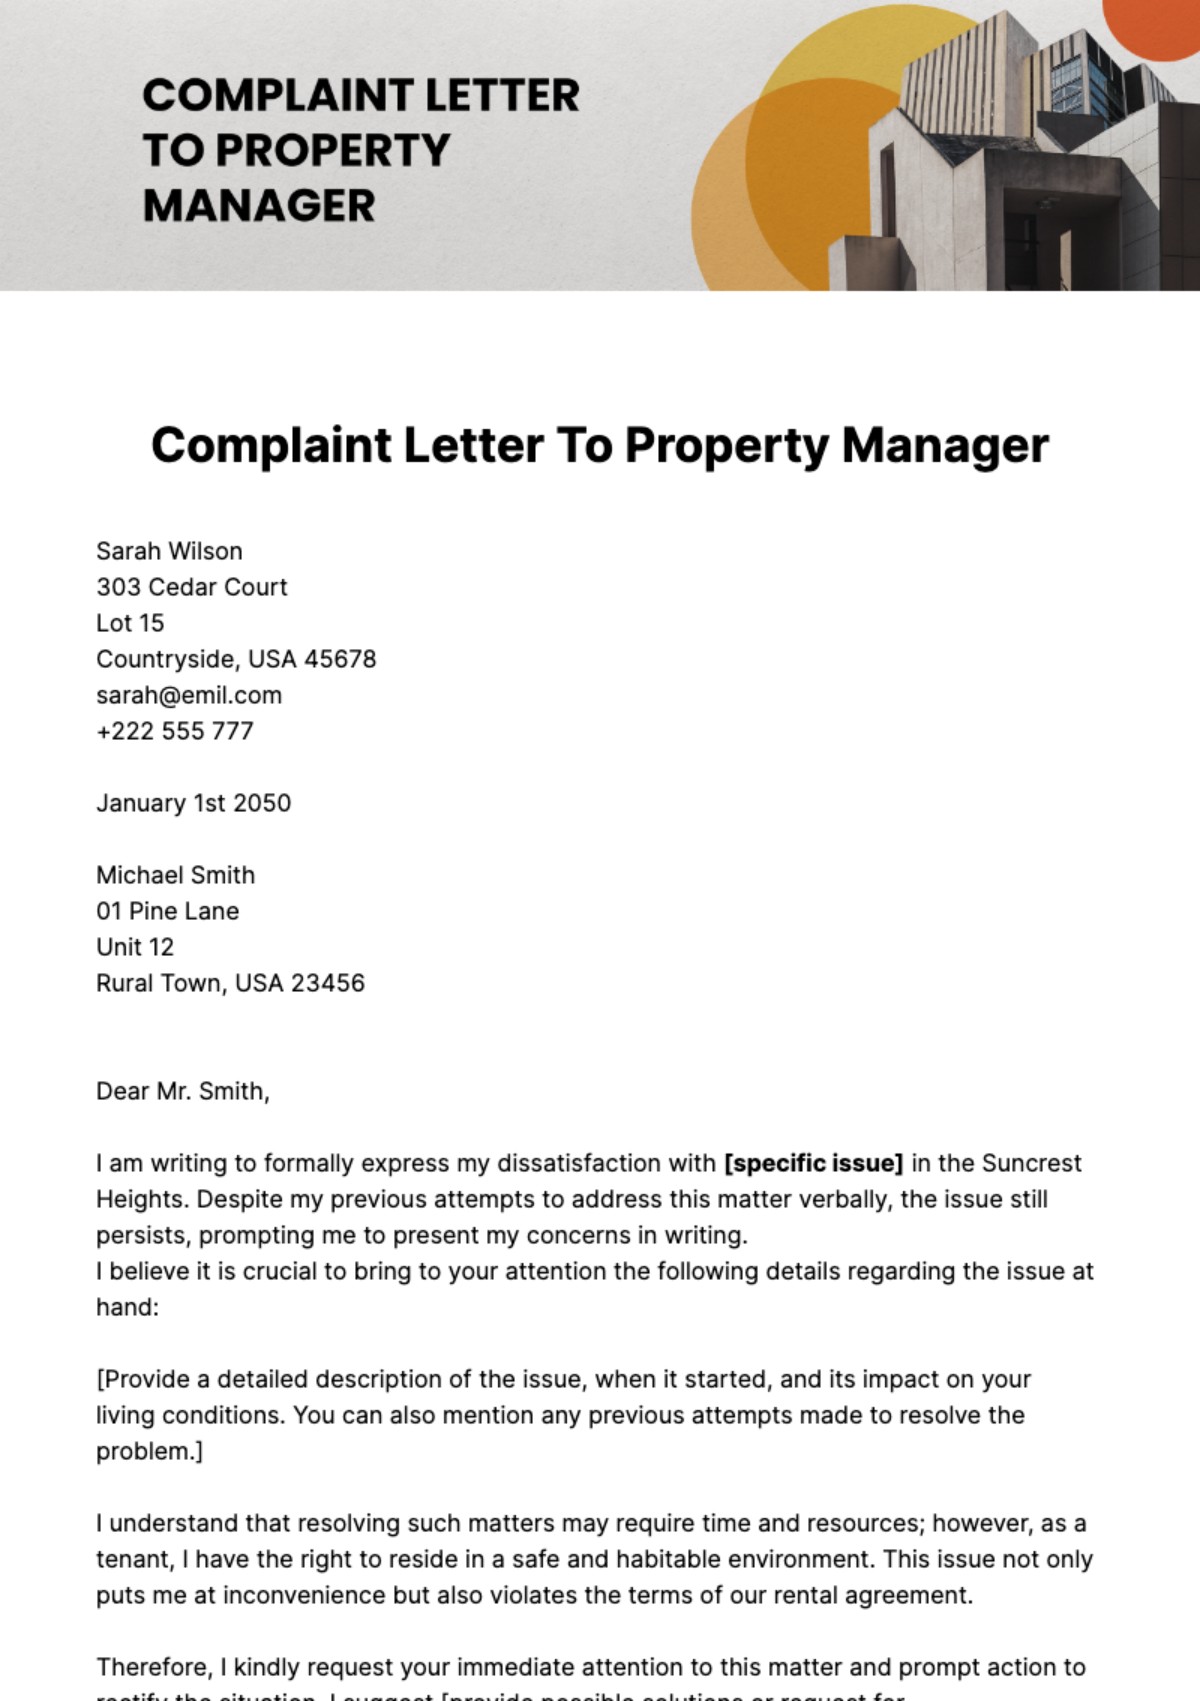 Free Complaint Letter To Property Manager Template